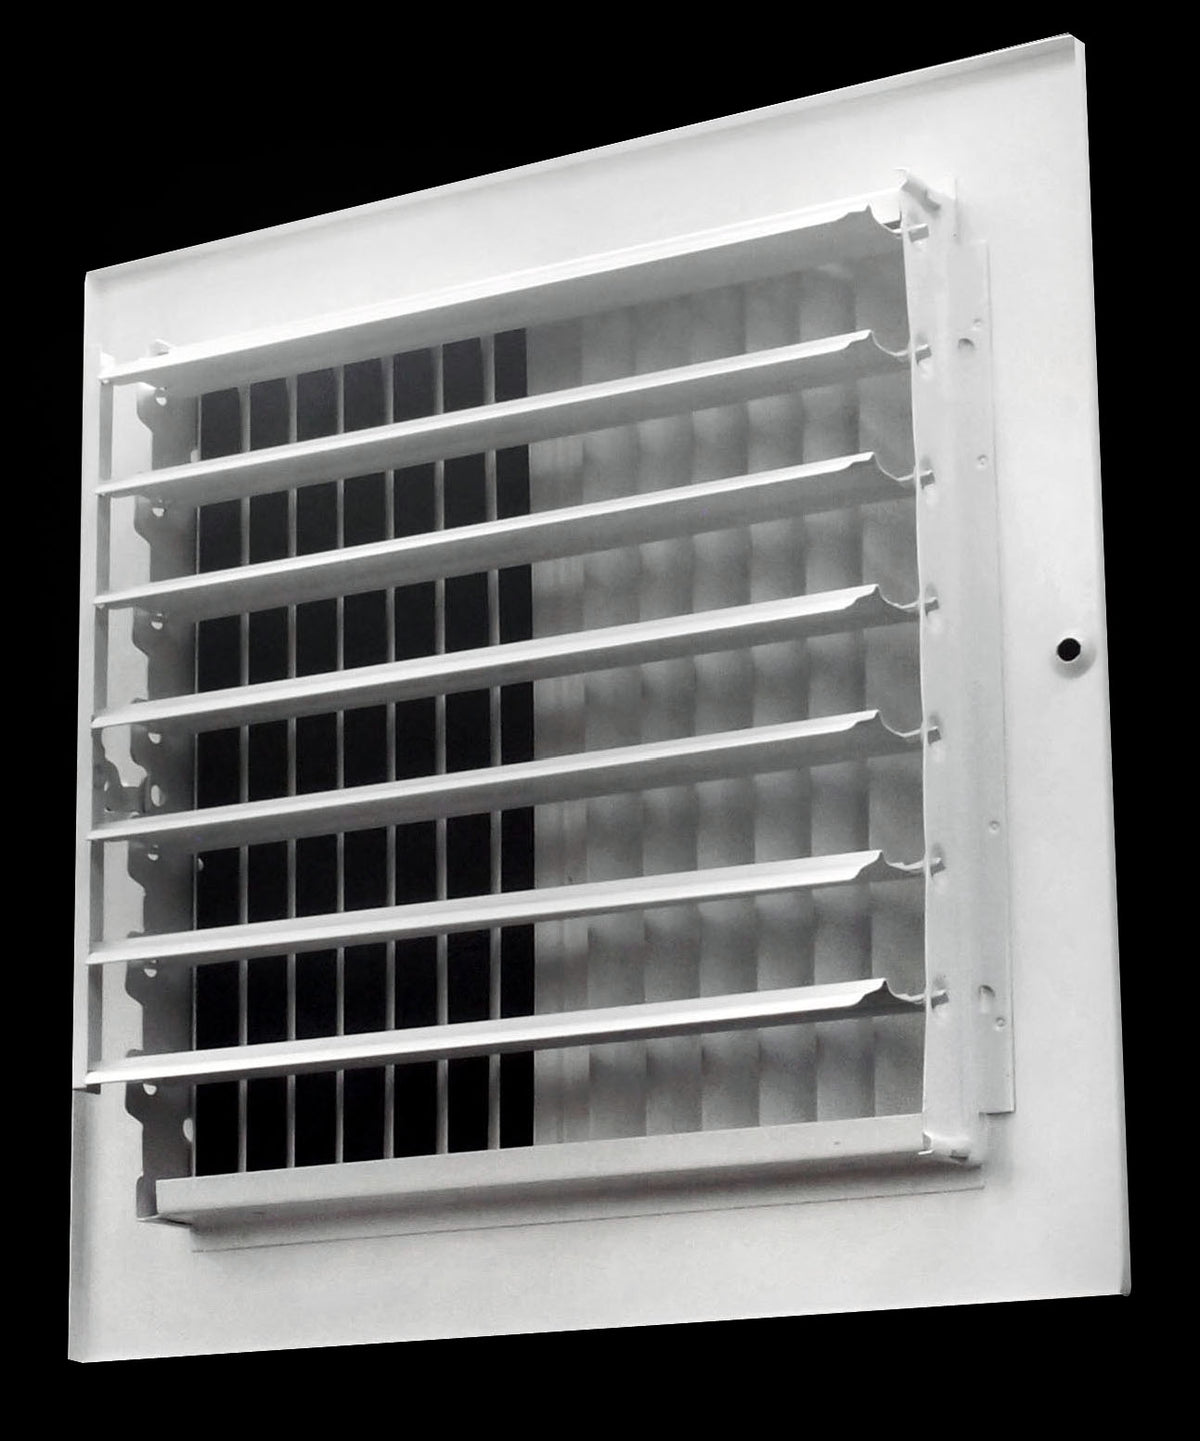 14&quot; X 14&quot; 2-Way Vertical AIR SUPPLY GRILLE - DUCT COVER &amp; DIFFUSER - Flat Stamped Face